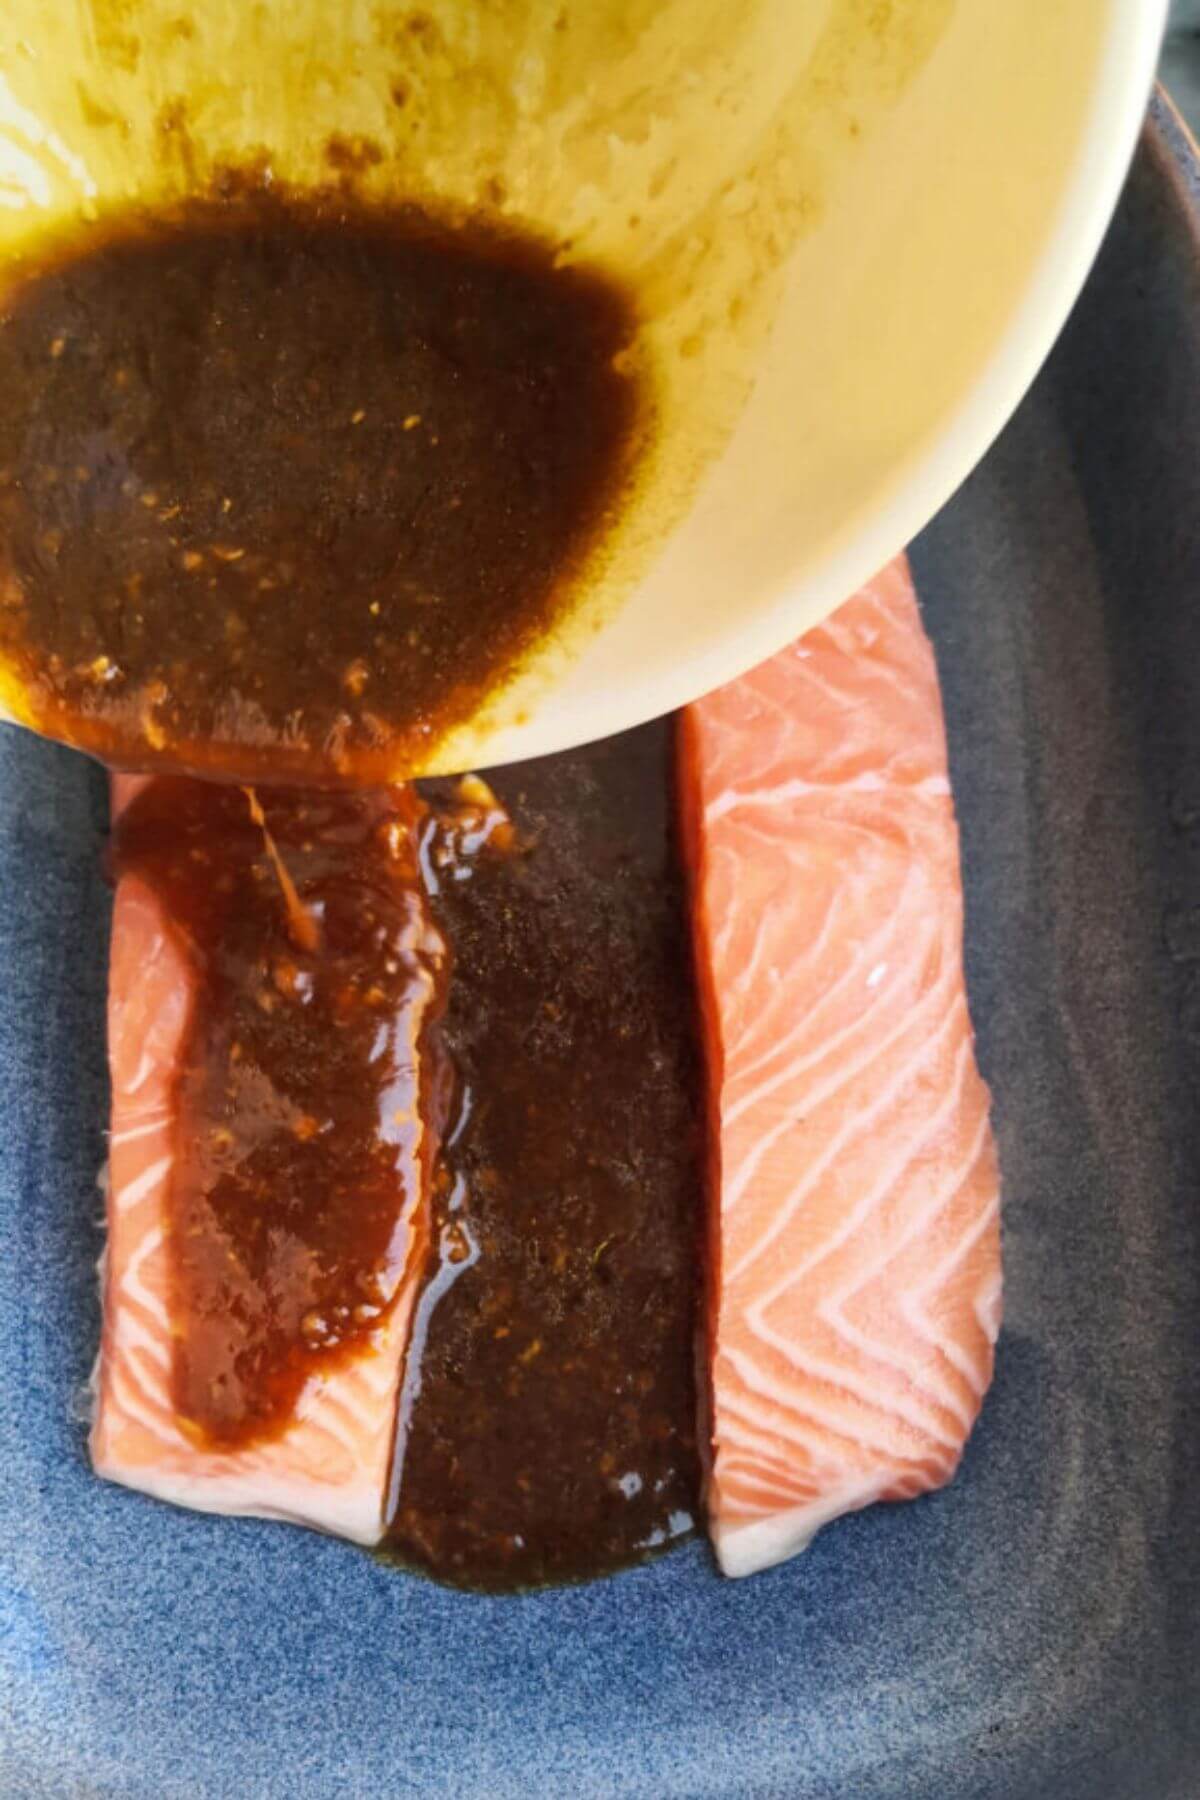 Pouring miso marinade over 2 salmon fillets in a blue oven dish.